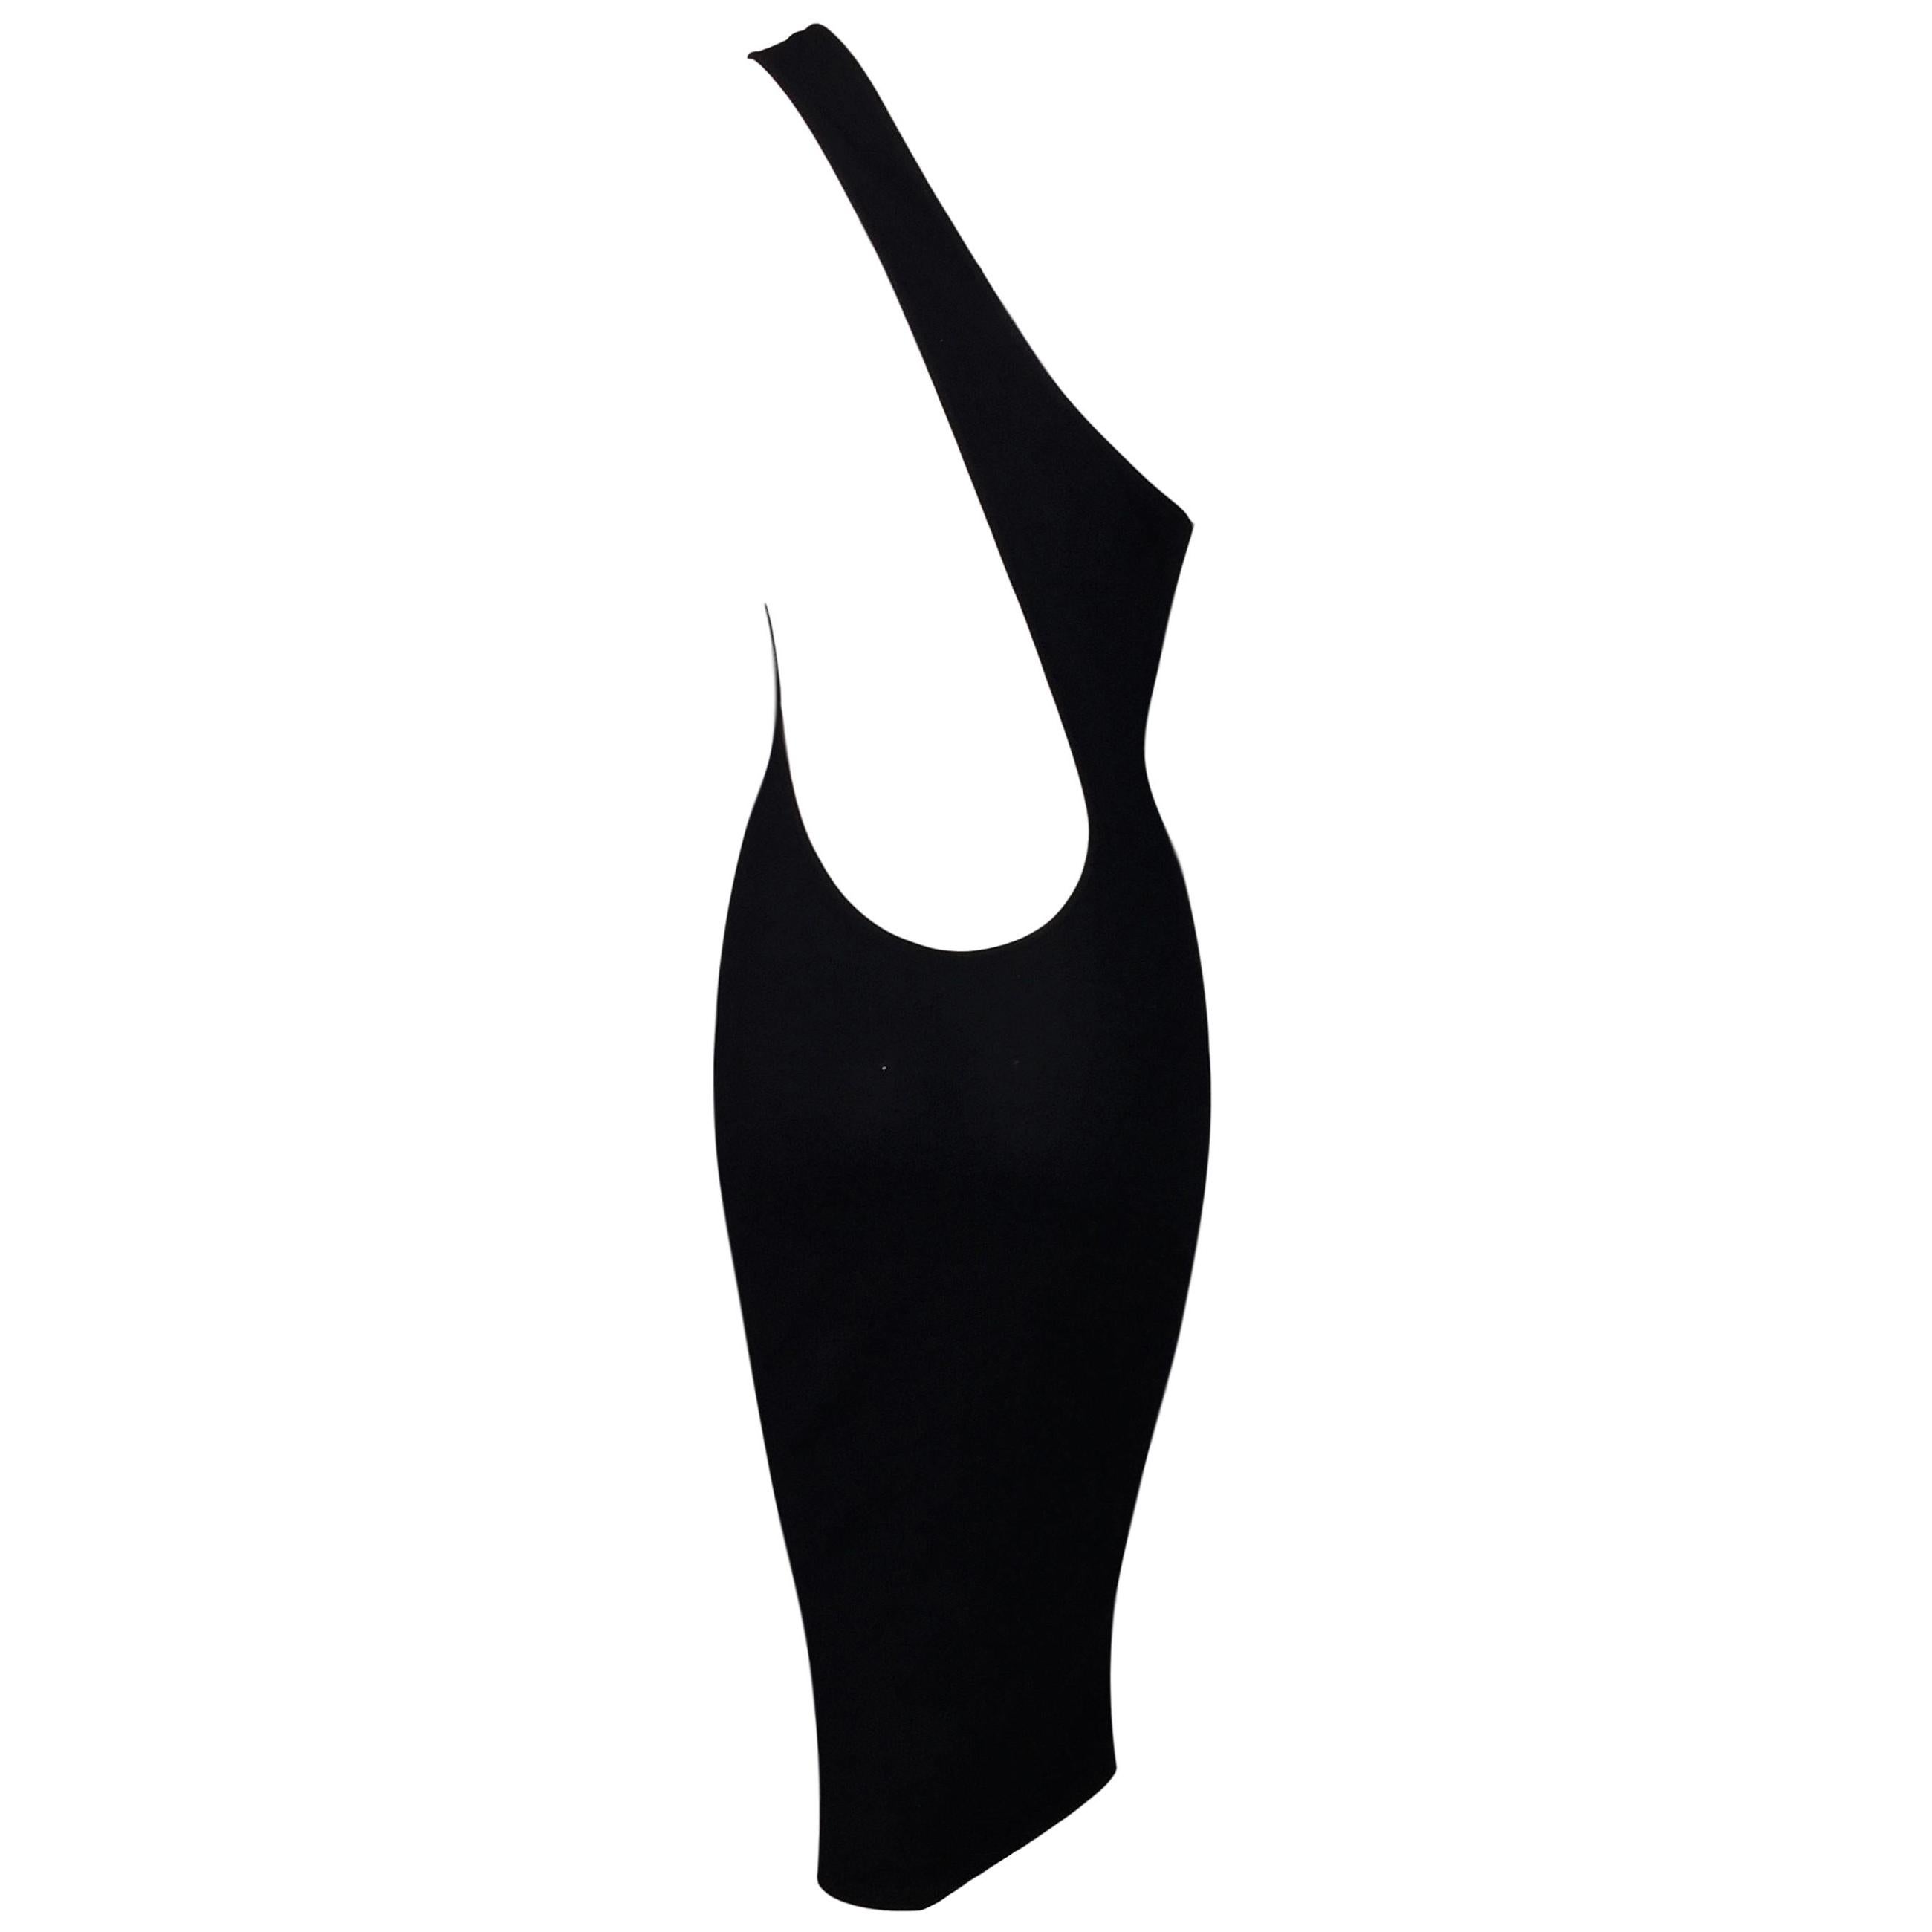 S/S 2000 Gucci Tom Ford One Shoulder Black Knit Plunging Back Bodycon Dress